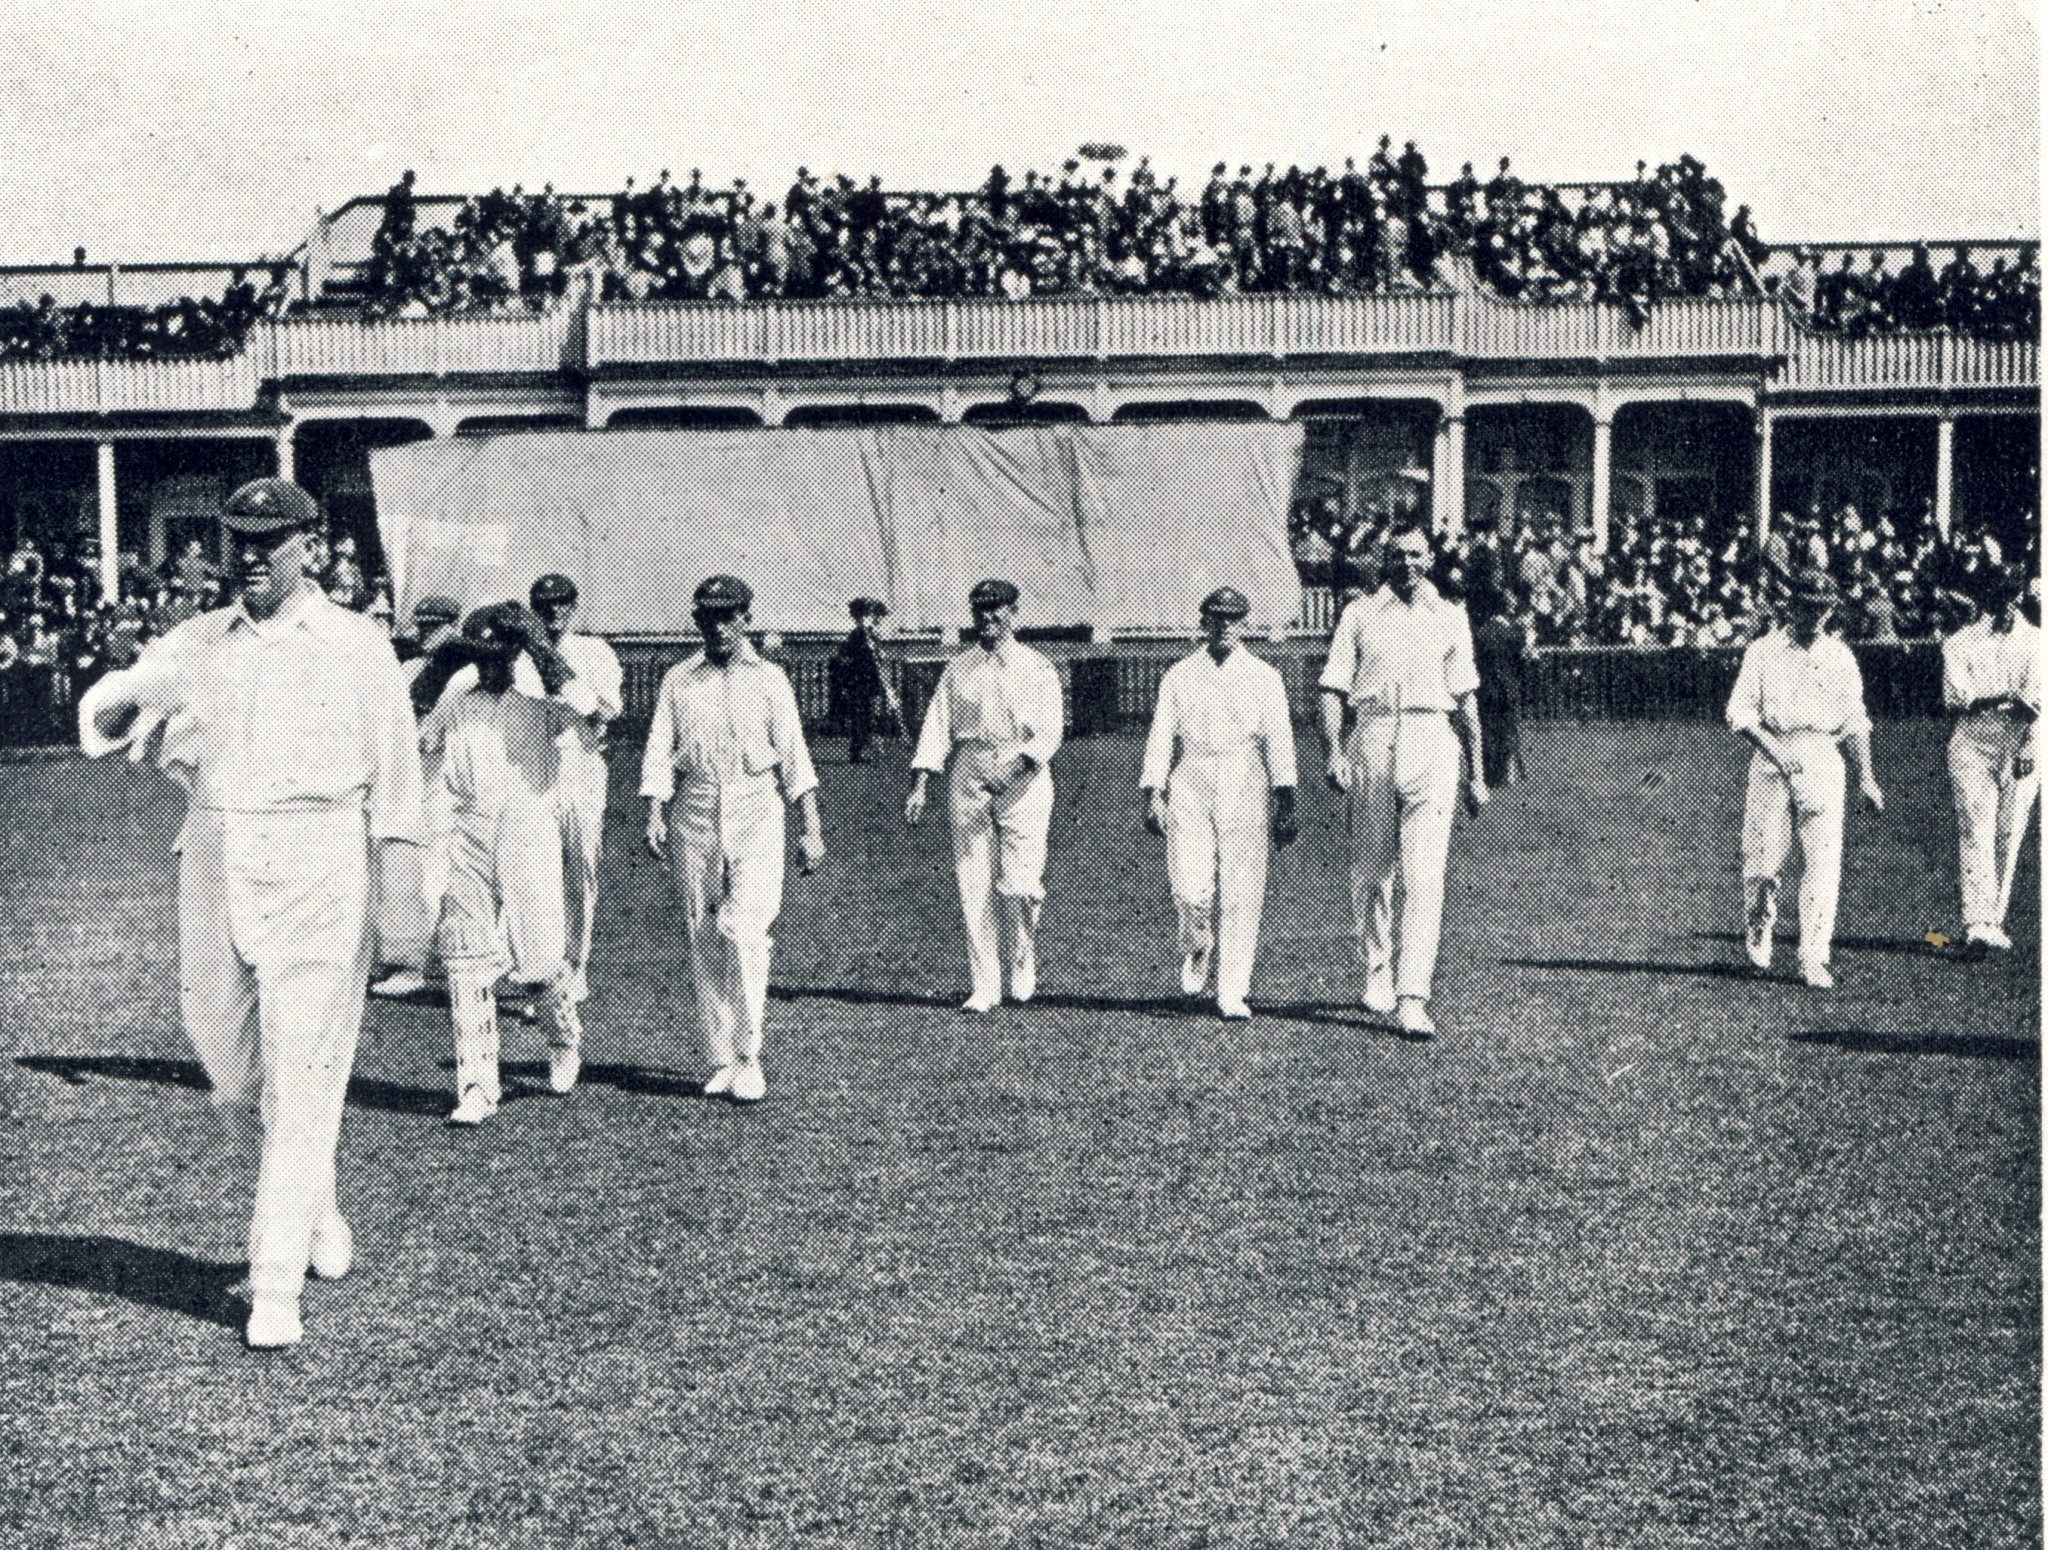 Australia were dominant in their home and away Ashes 100 years ago, winning 5-0 on home soil and 3-0 in England ©ITG